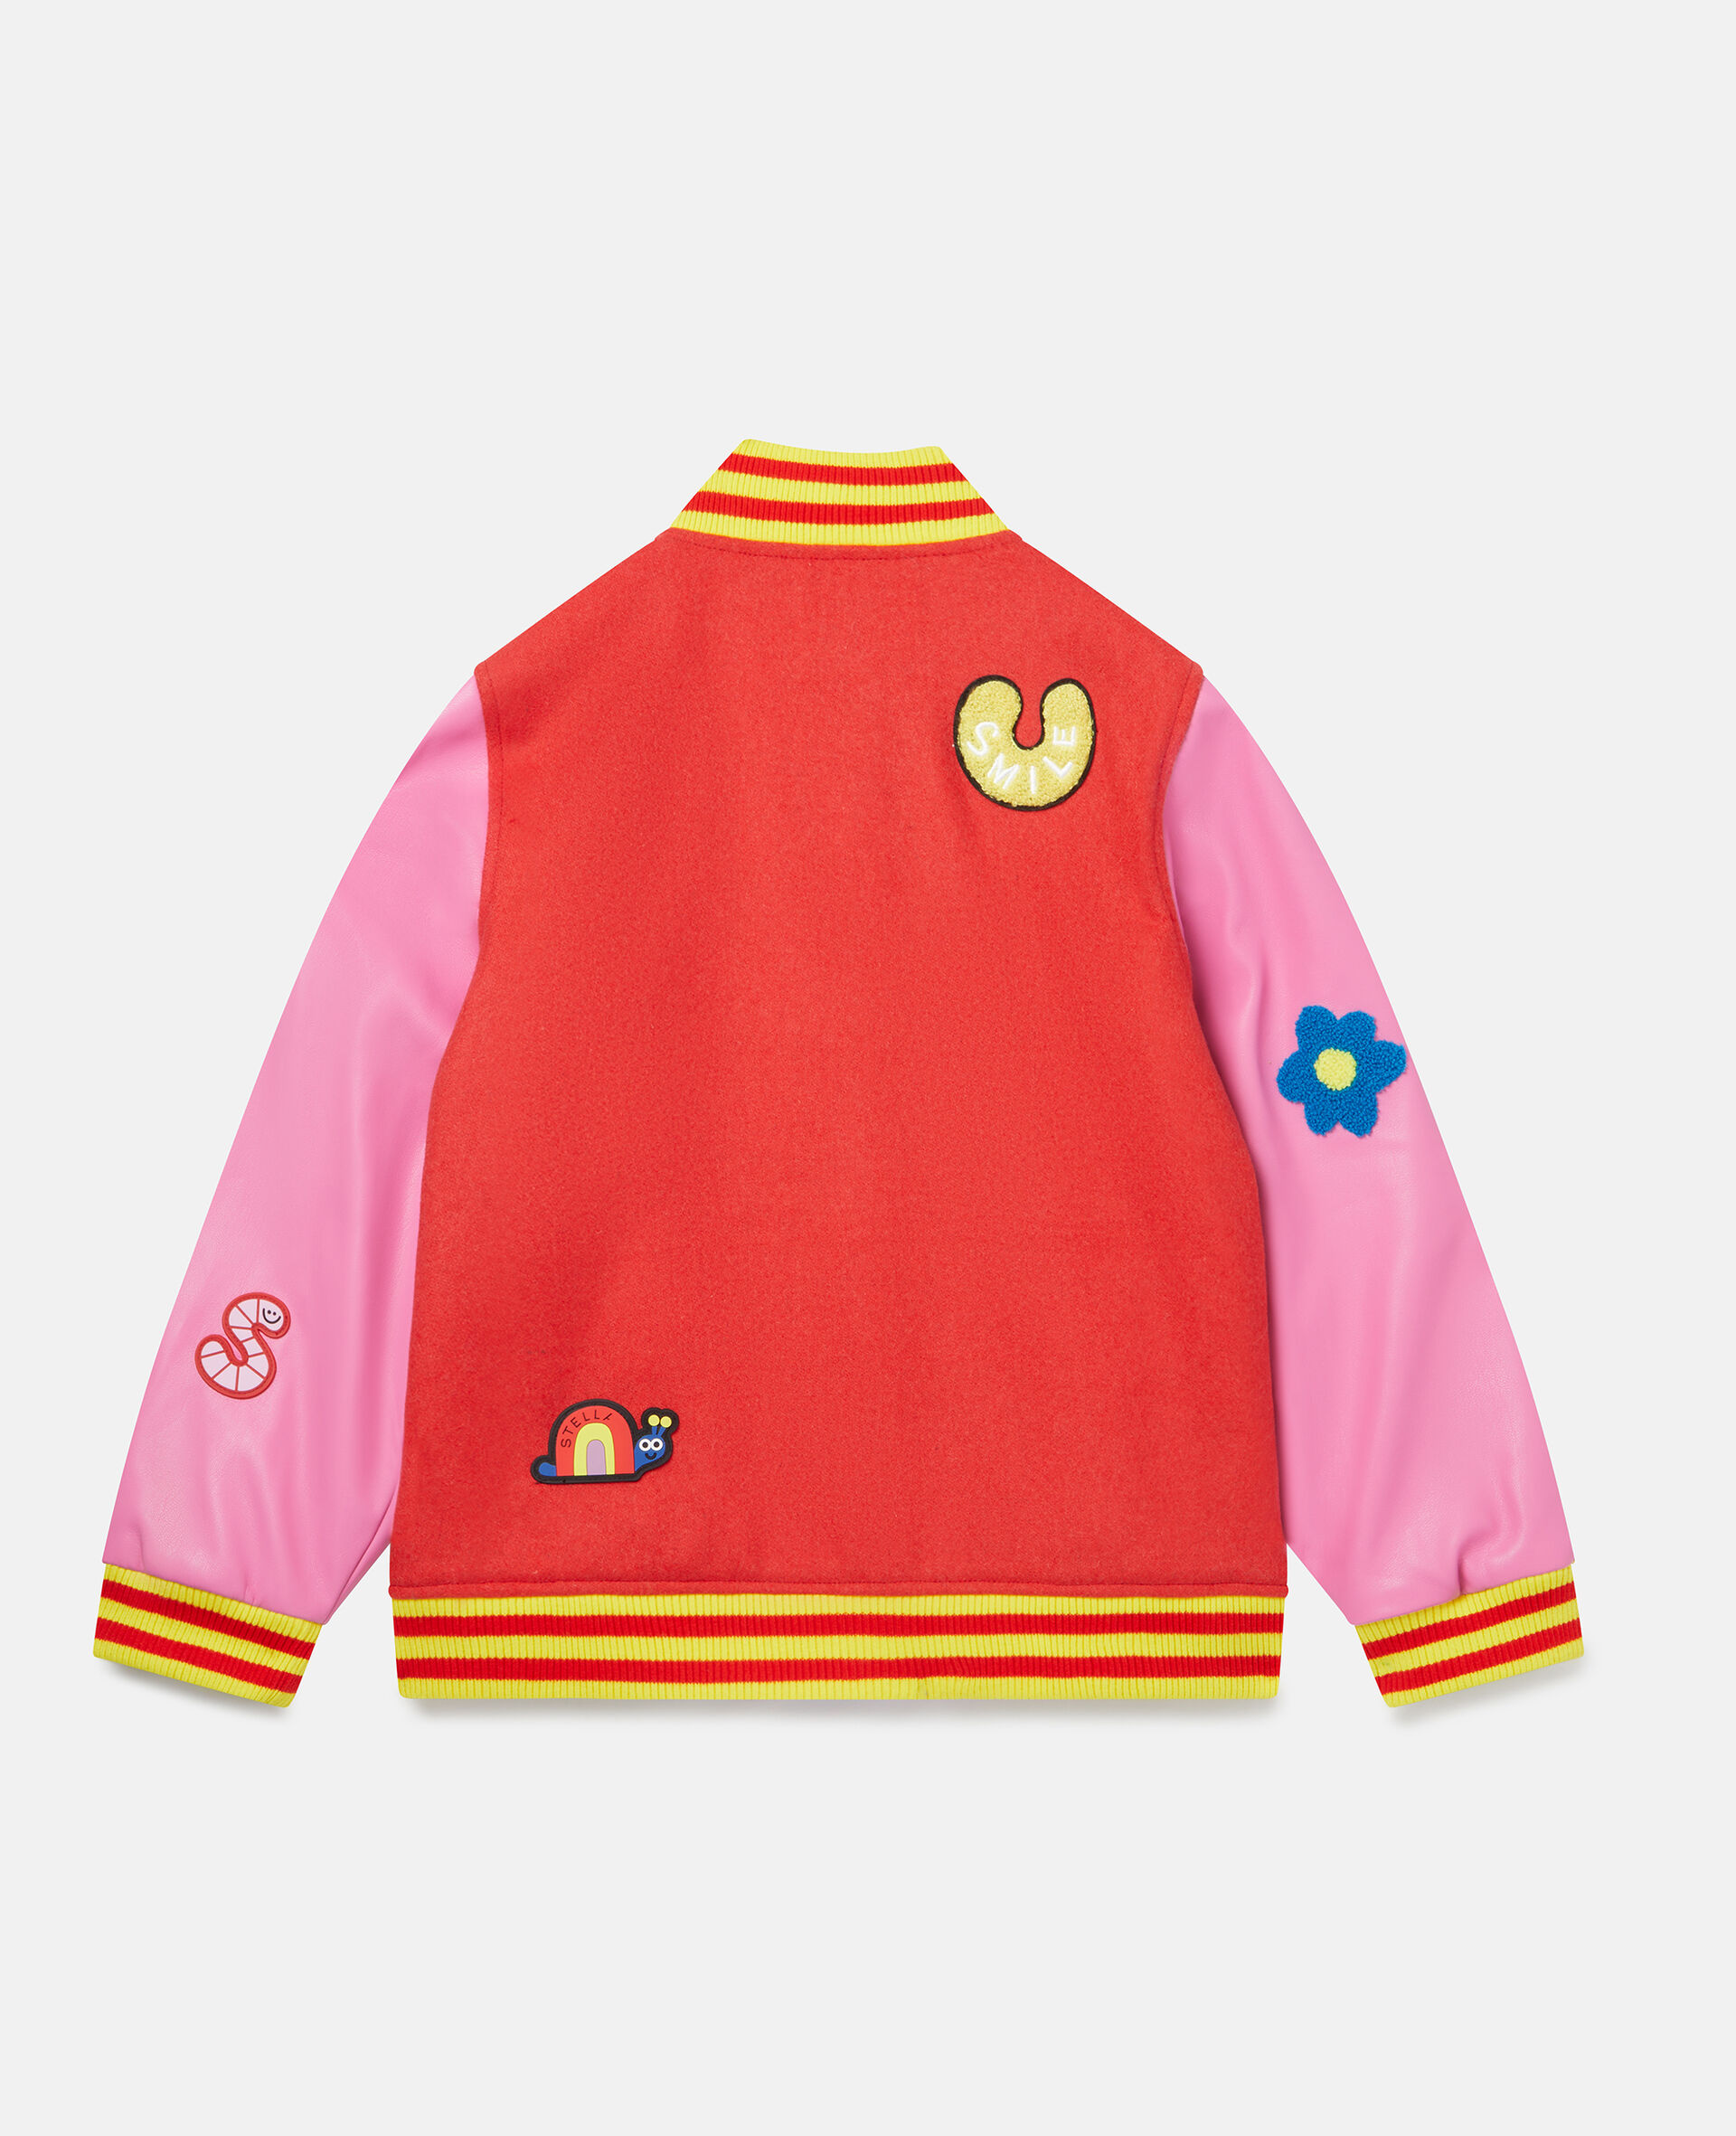 Embroidered Patch Varsity Jacket-Red-large image number 2